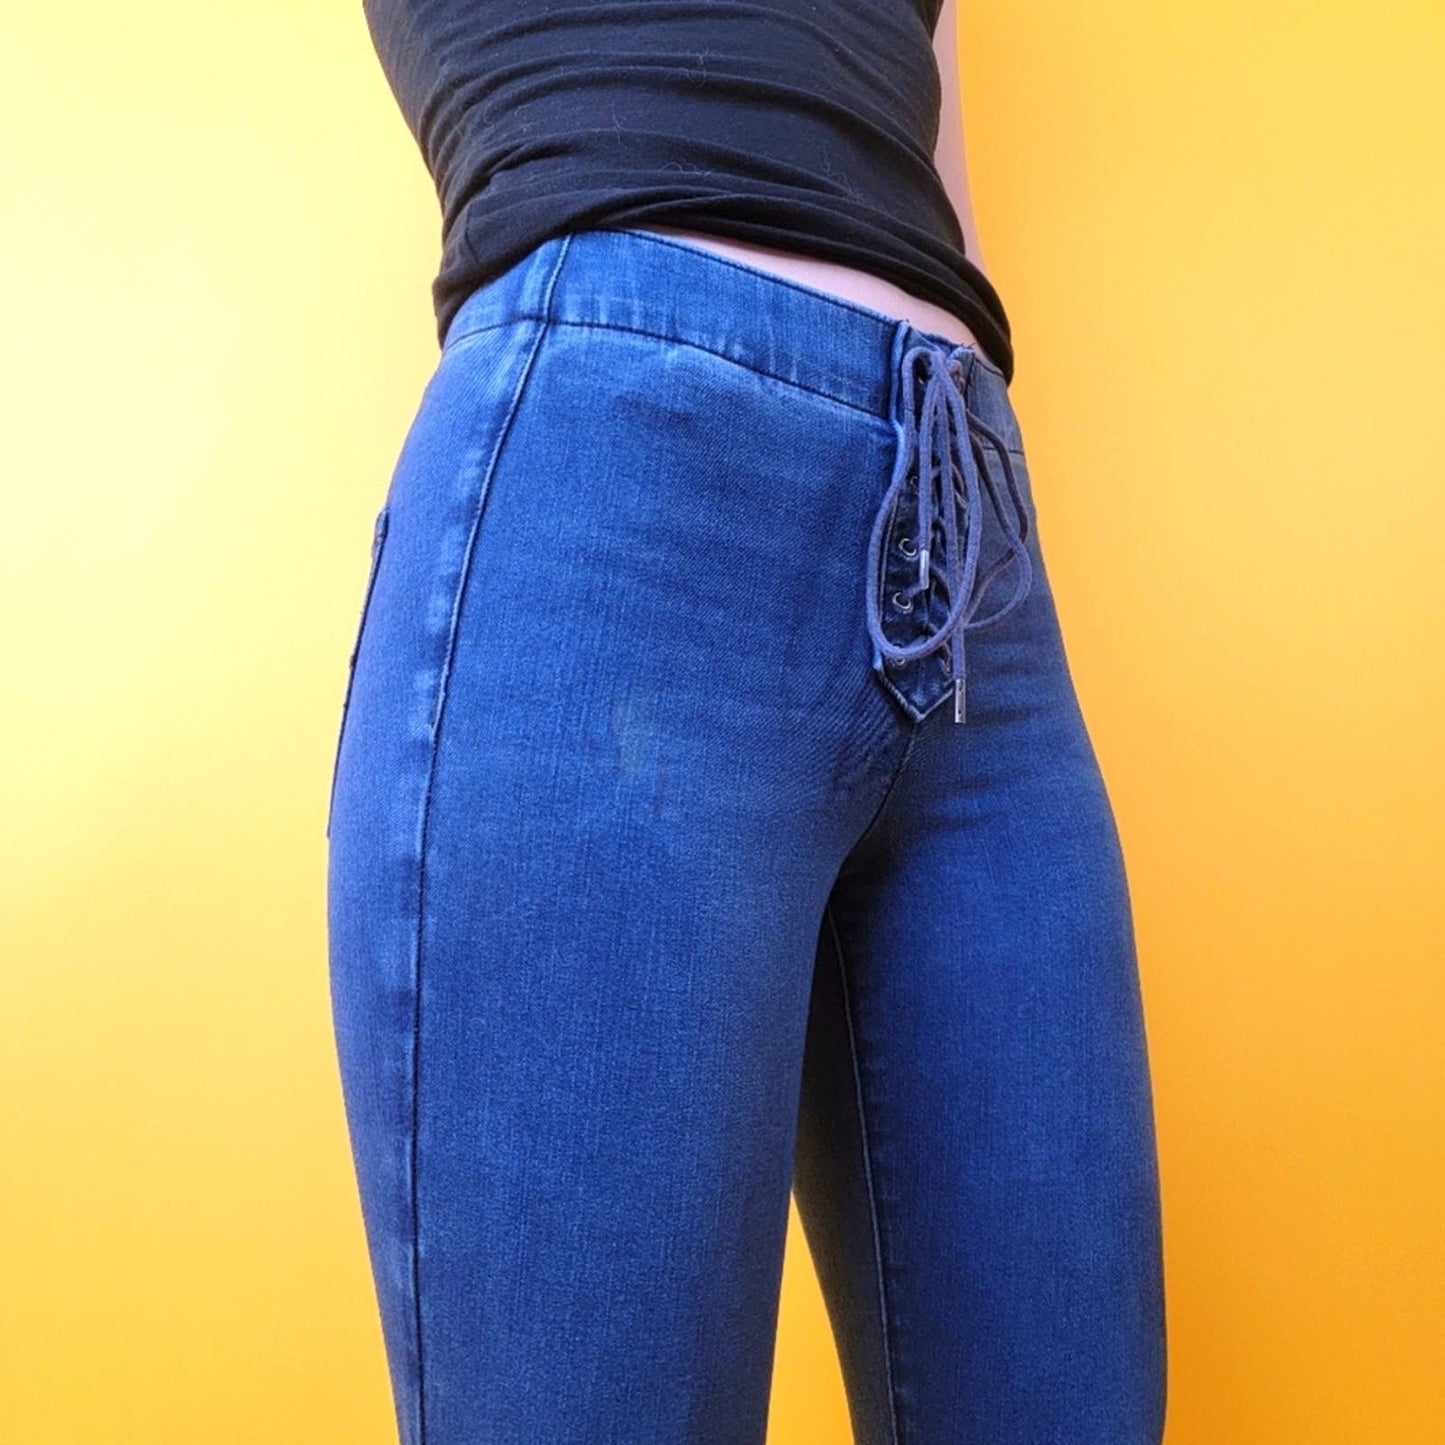 American Eagle 360 Next Level Stretch Jeans/Jeggings